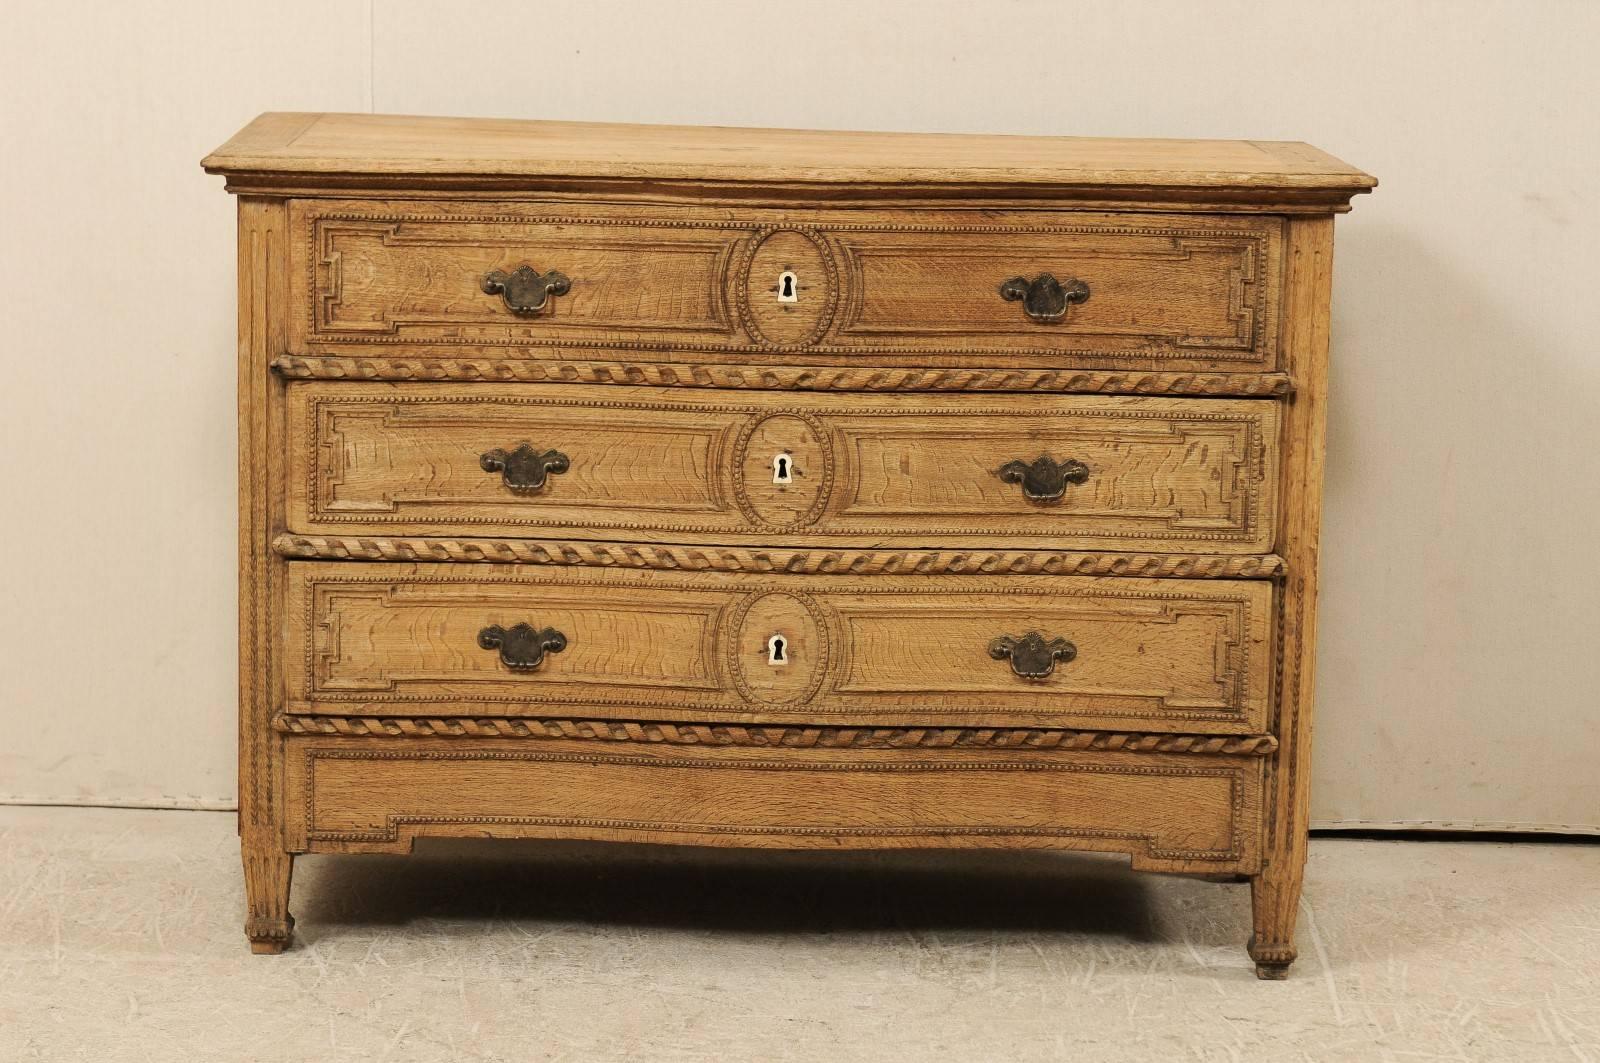 A late 18th-early 19th century French carved wood three-drawer chest. This French three-drawer chest features a soft serpentine style body of natural oakwood. Each of the three drawers are nicely carved in beaded and roped designs, flanked at either